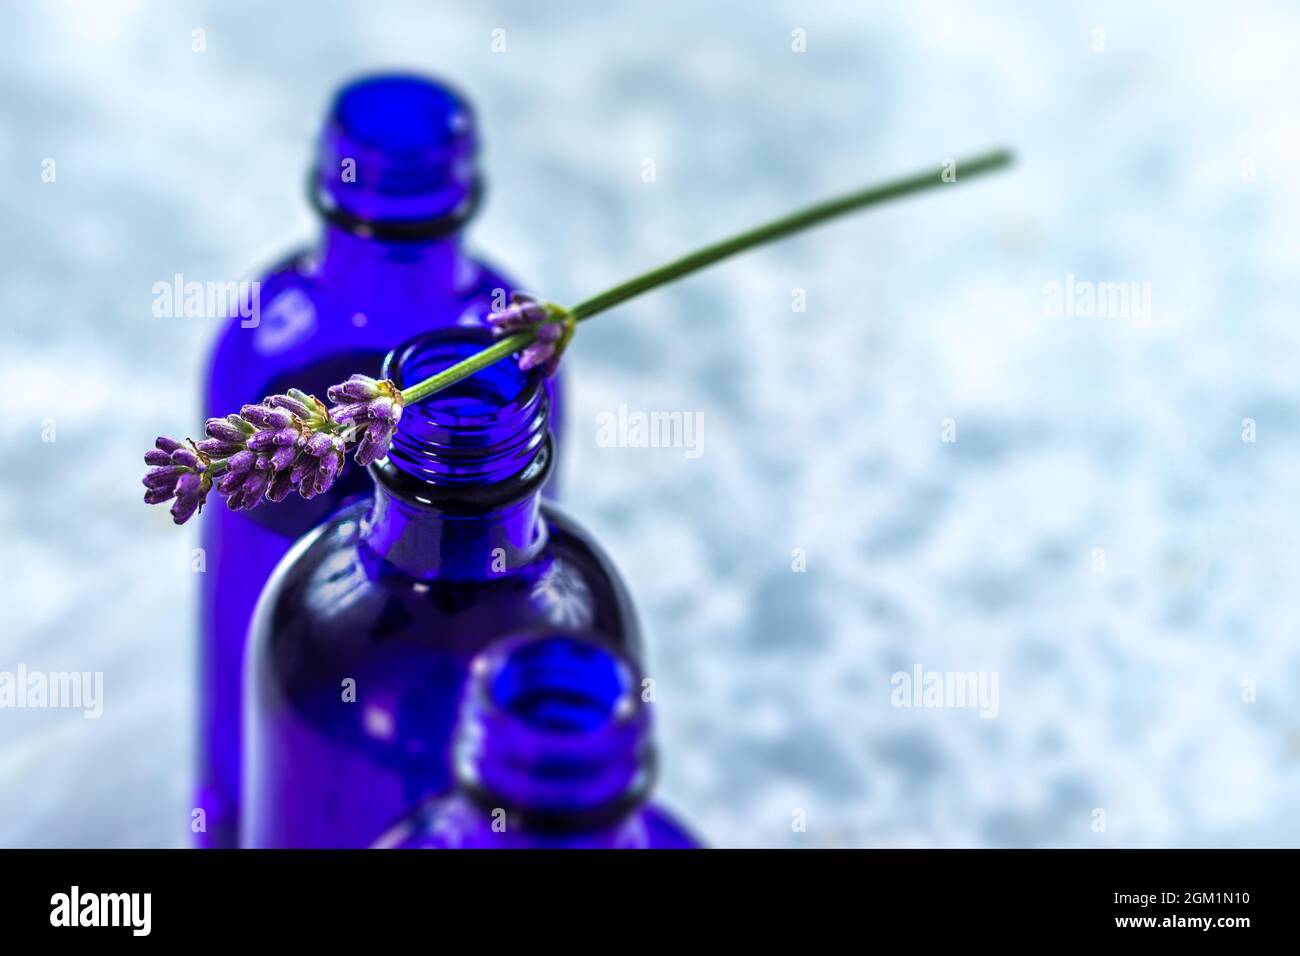 Essential oil and lavender flowers on top of blue bottle. Stock Photo